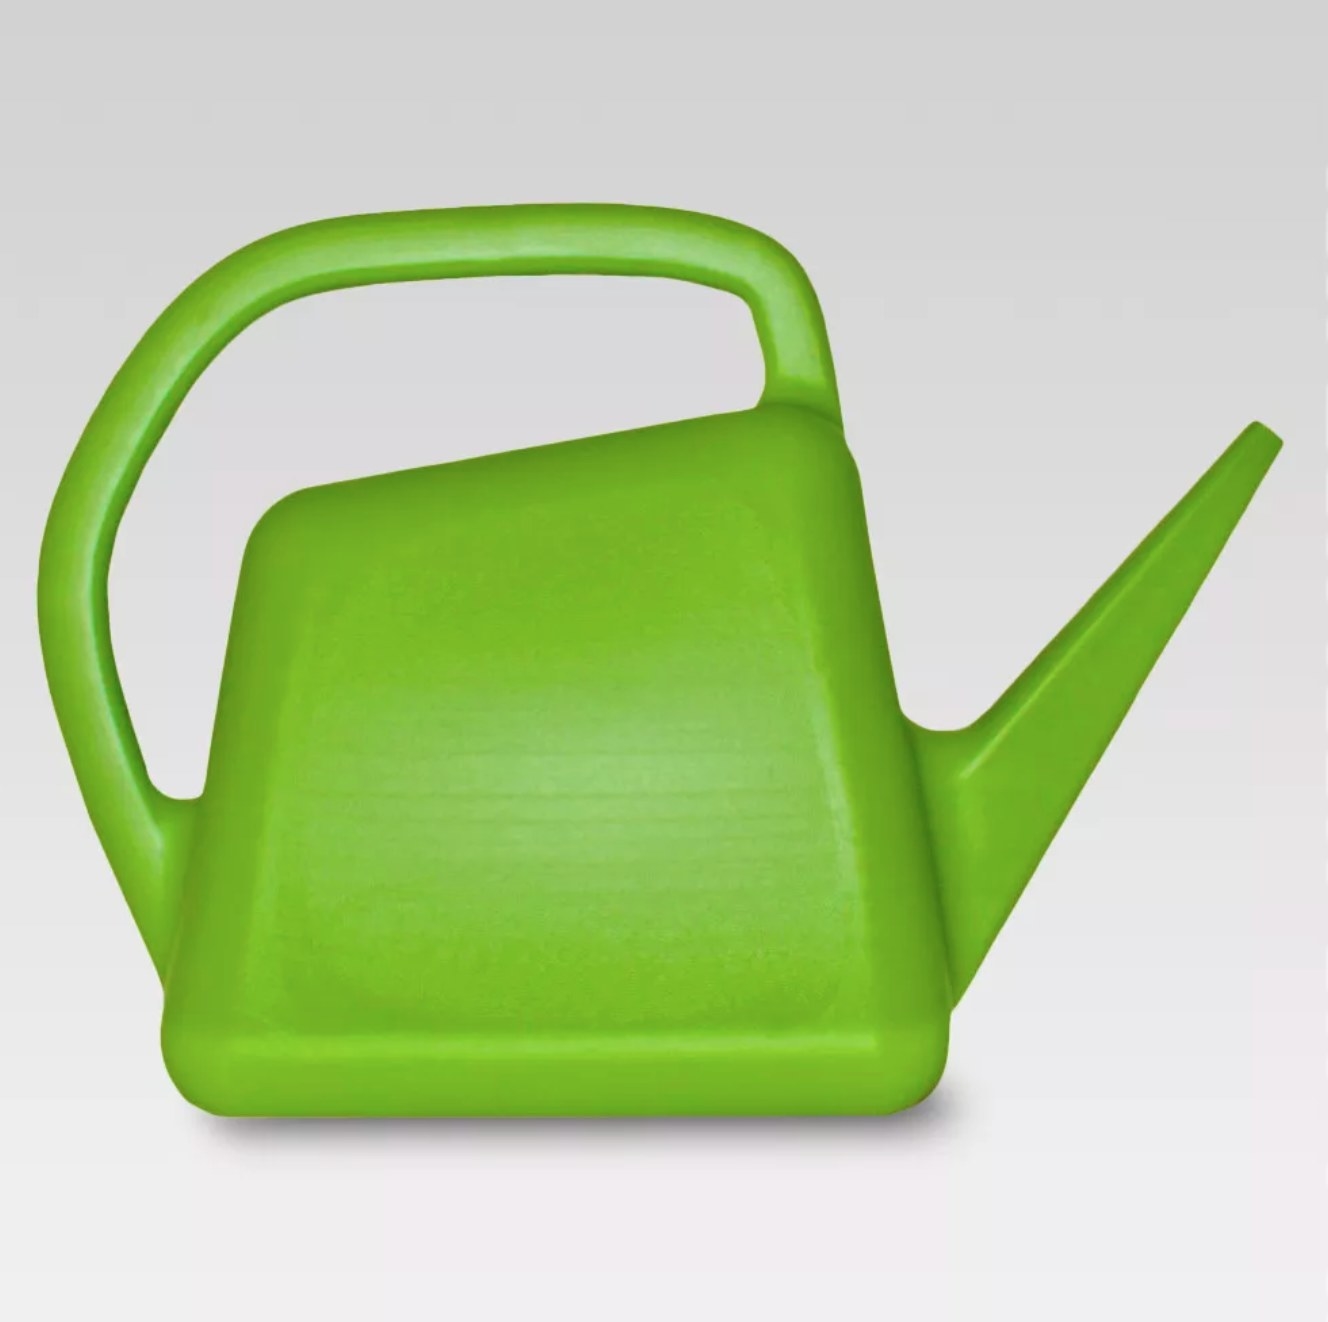 The green watering can